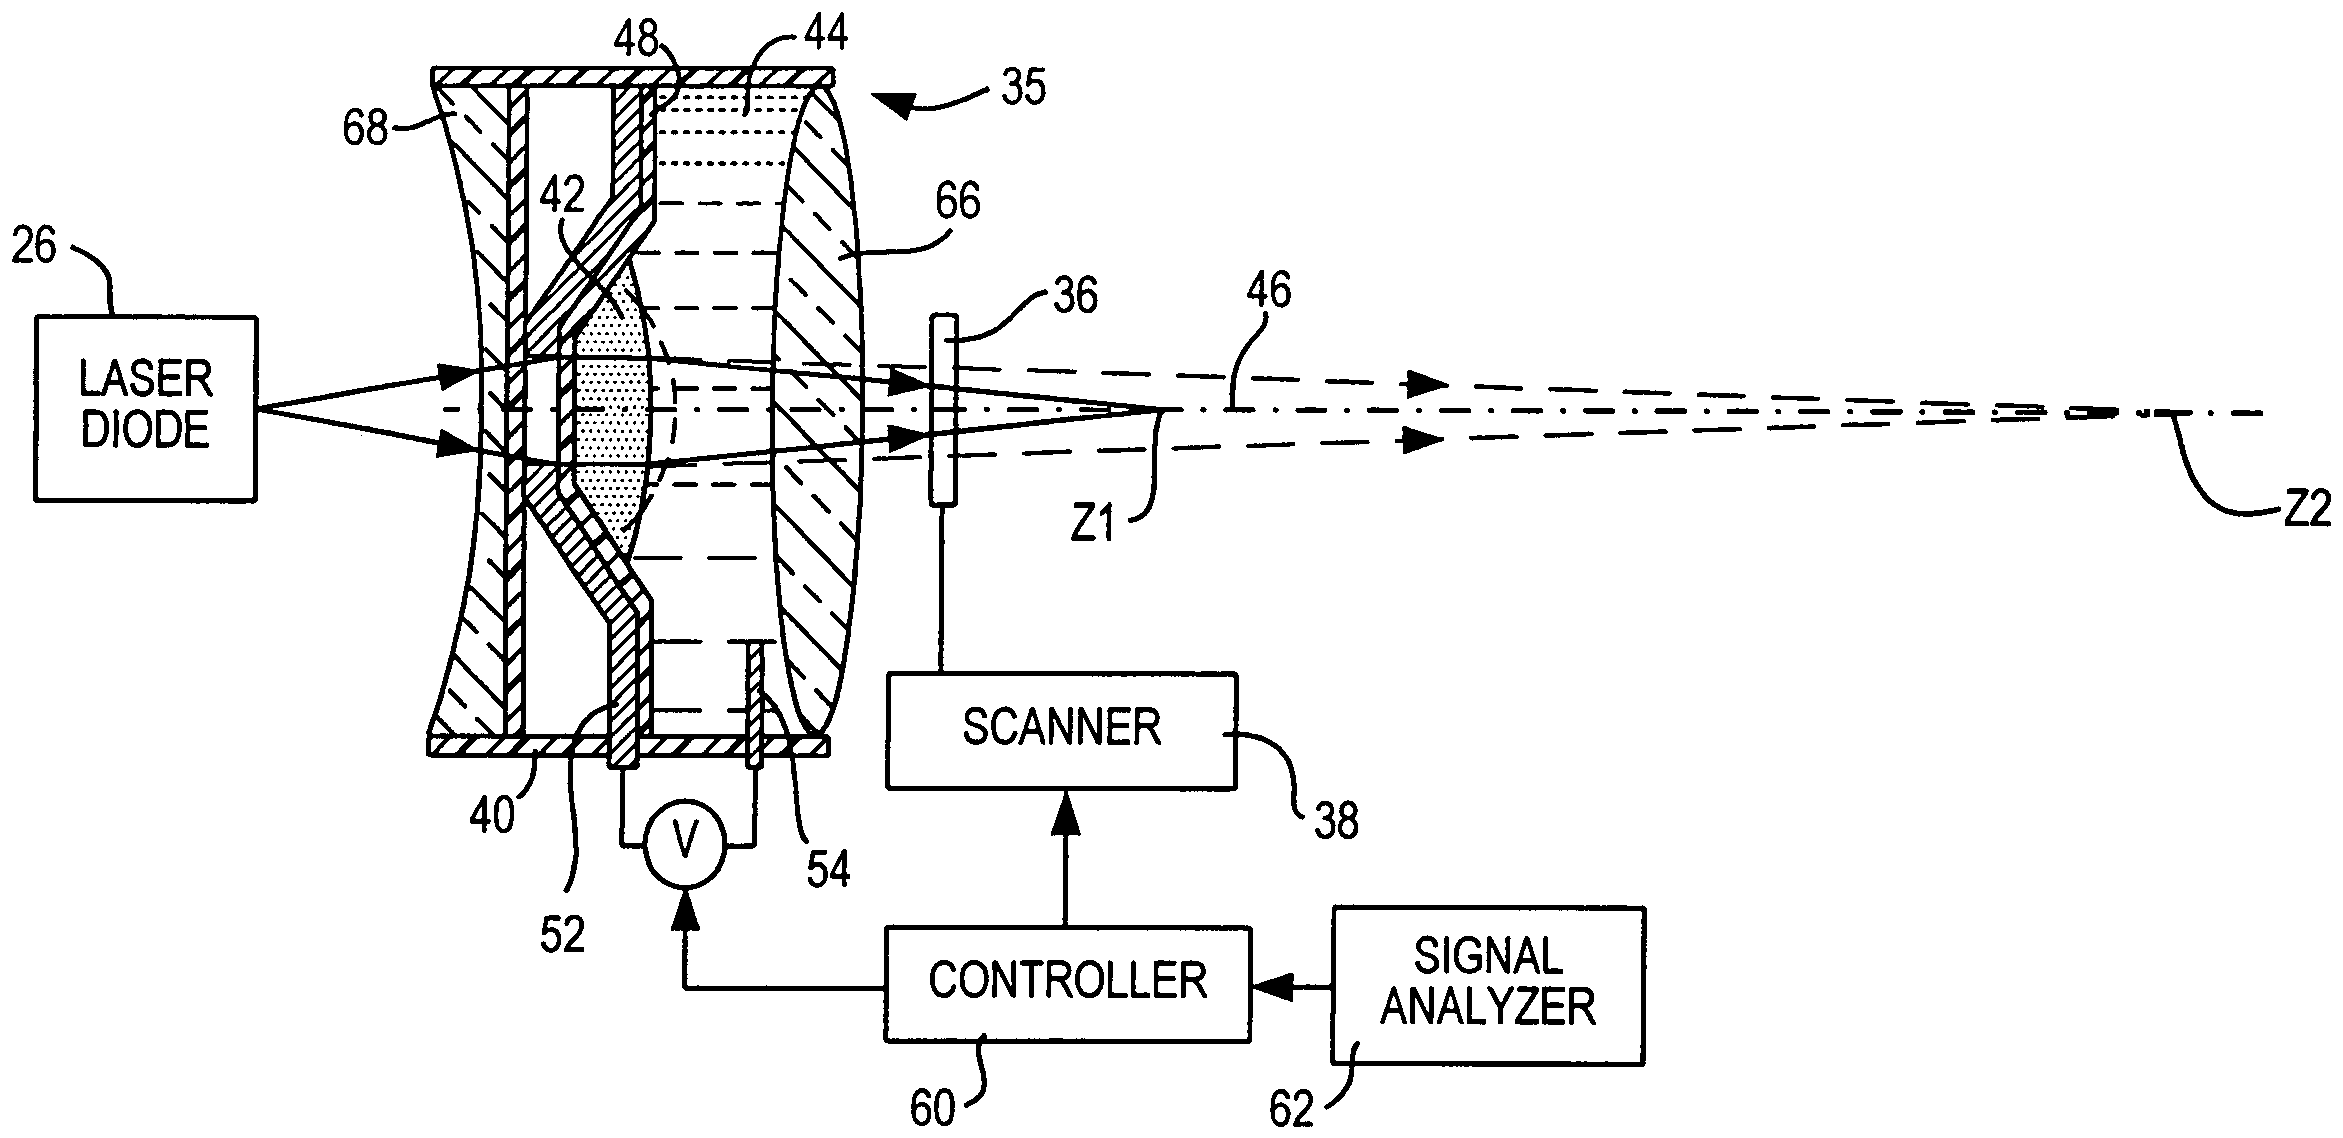 Optical adjustment of working range and beam spot size in electro-optical readers